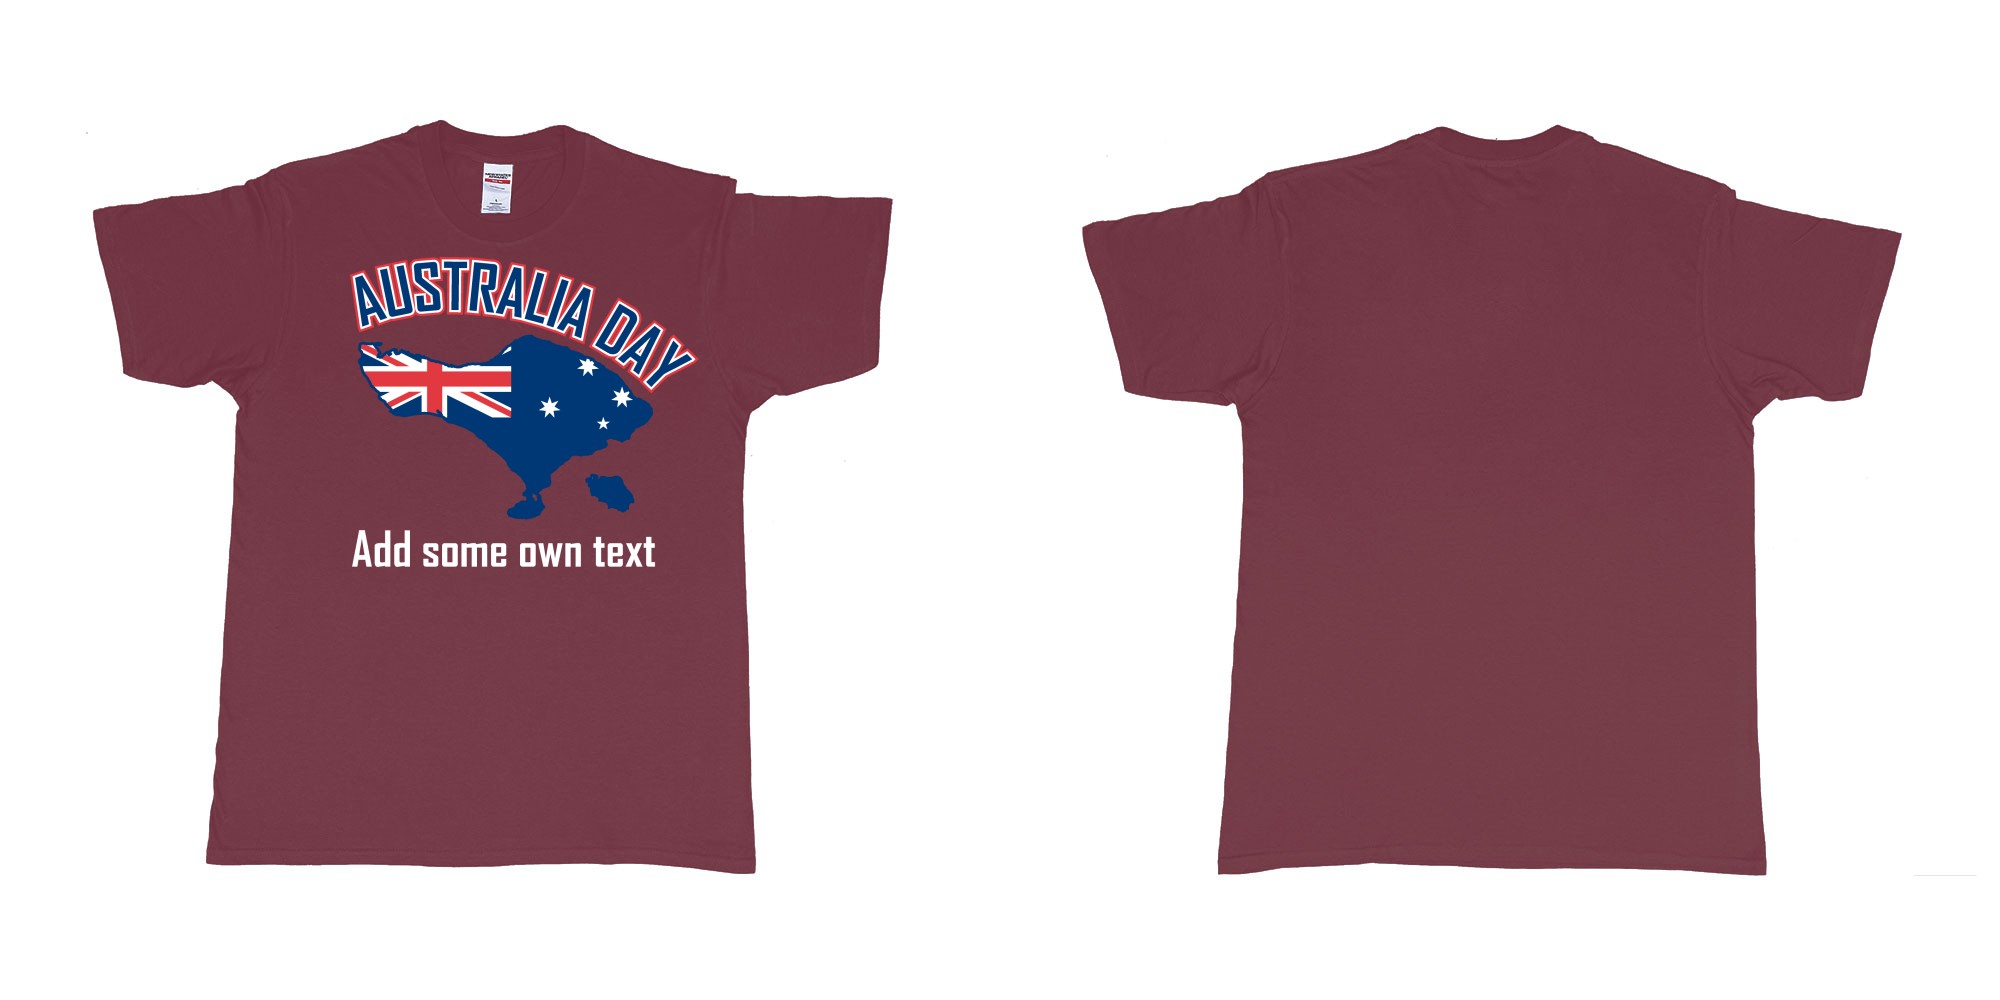 Custom tshirt design australia day in bali custom teeshirt printing in fabric color marron choice your own text made in Bali by The Pirate Way